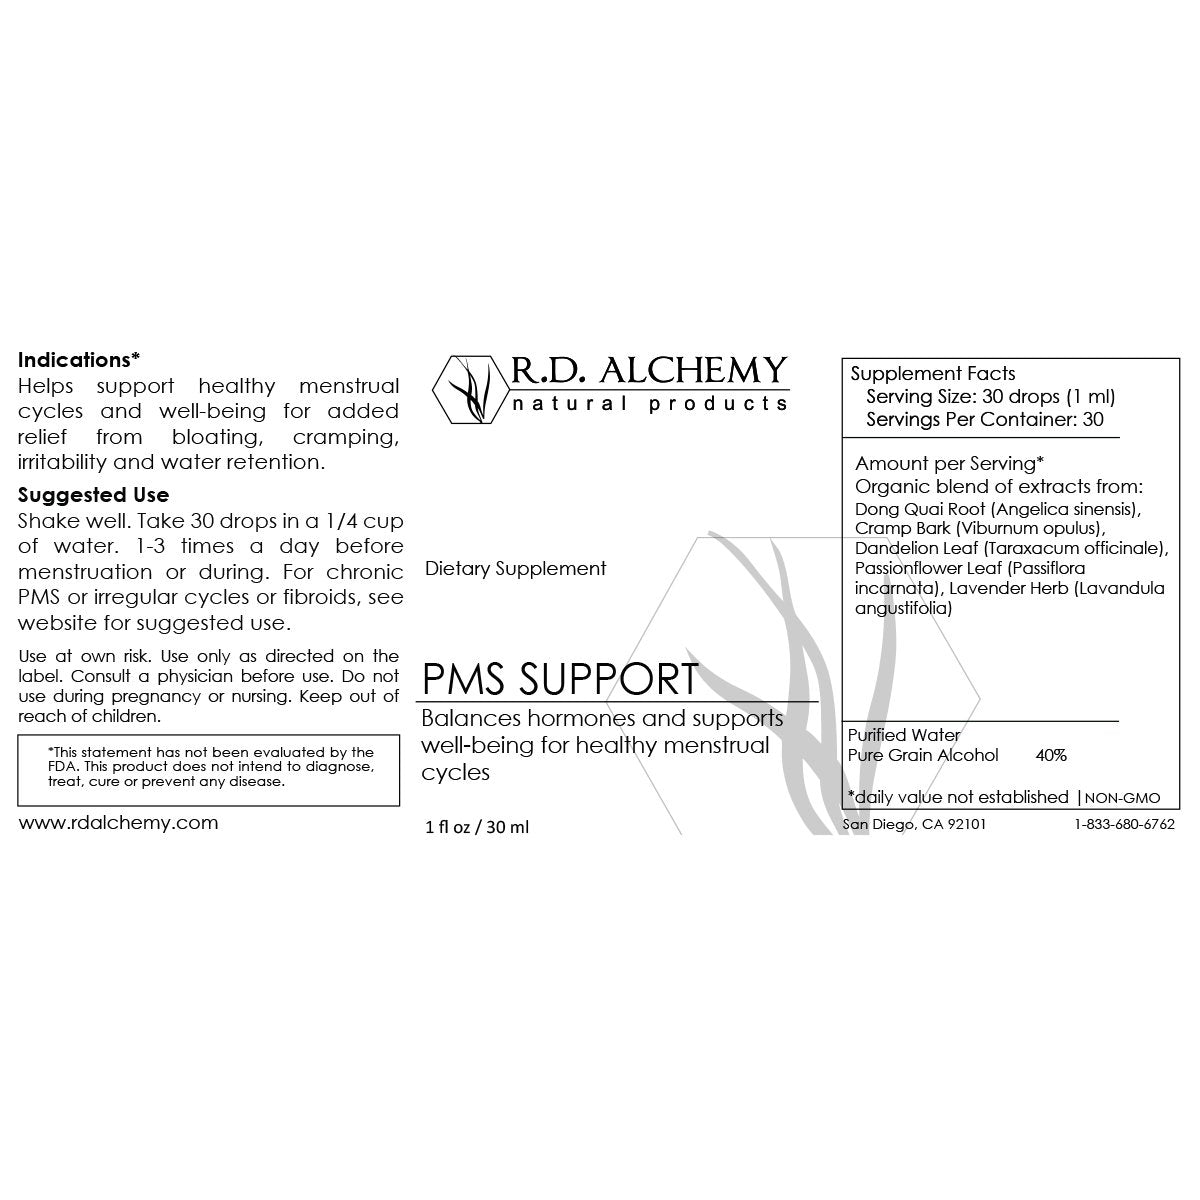 PMS Support Extract